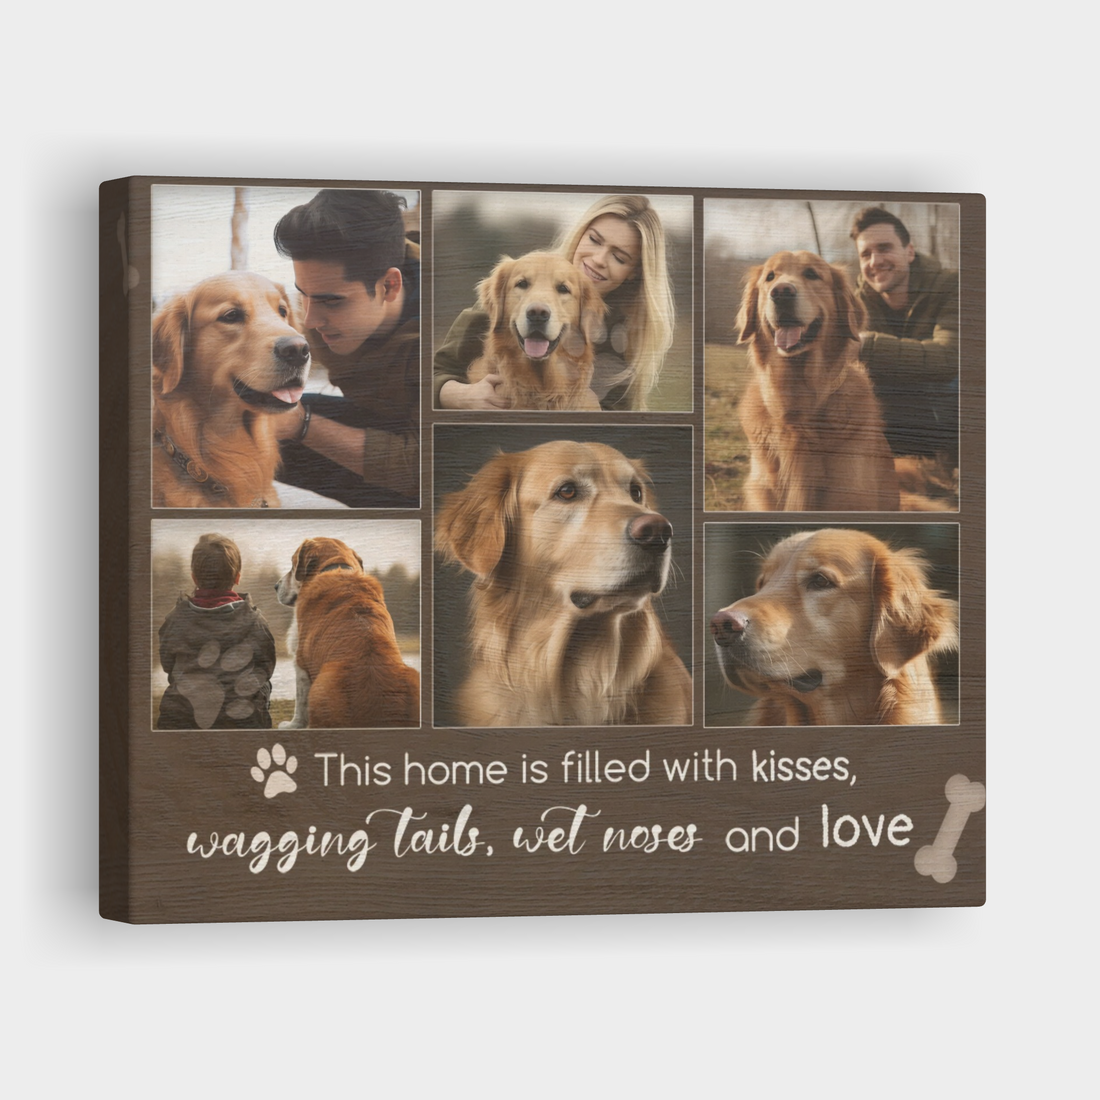 This Home Is Filled With Love, Hang and Place - Personalized Canvas Print Pet Lover